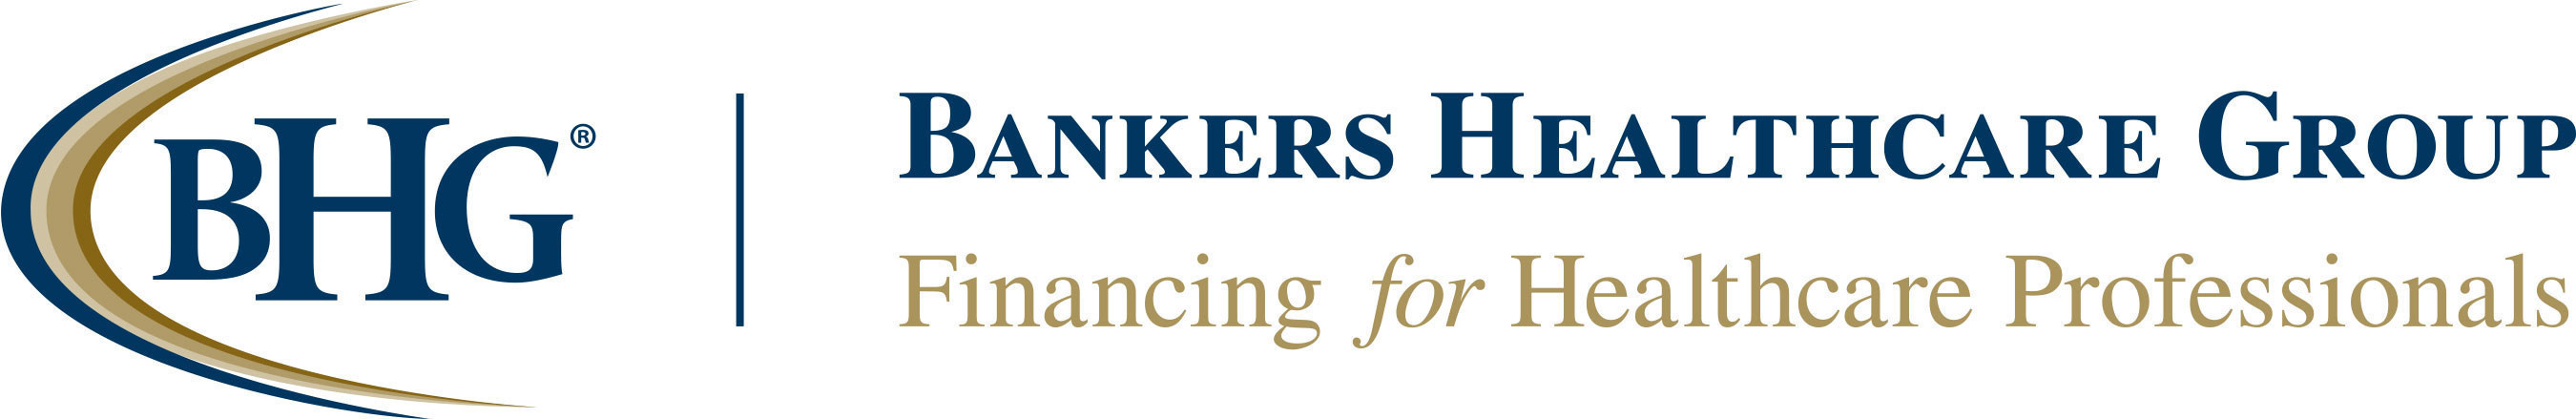 Since 2001, Bankers Healthcare Group has been committed to providing hassle-free financial solutions to healthcare professionals, including personal and commercial loans, credits cards and insurance services.